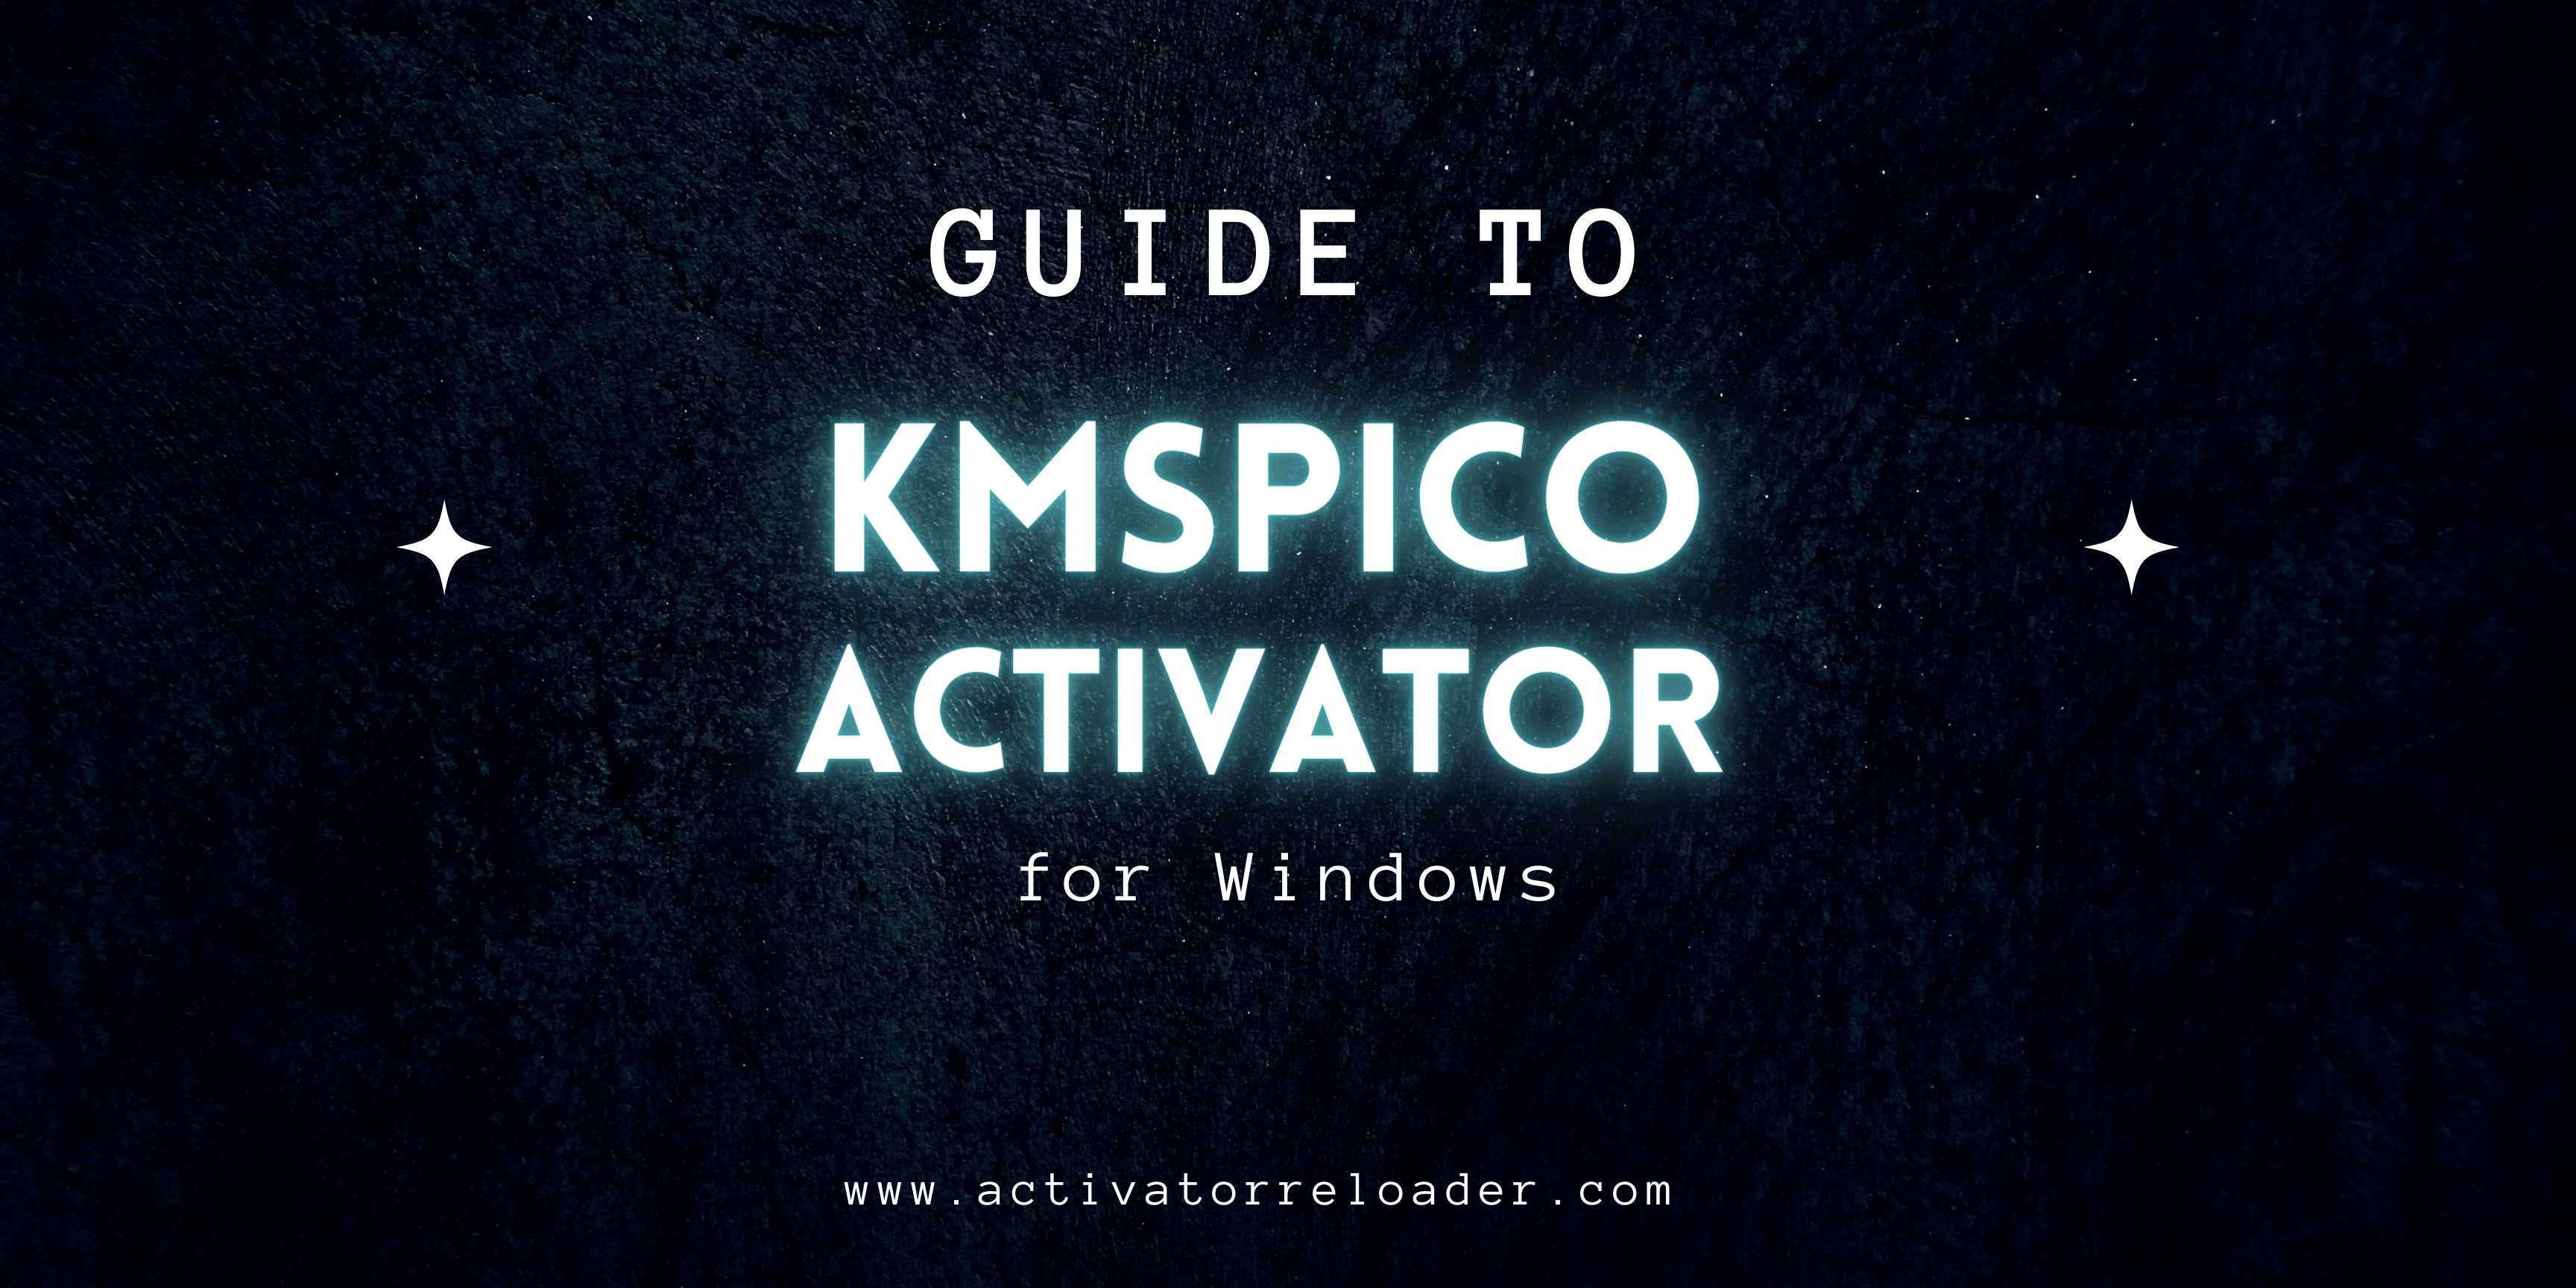 Guide To KMSpico Activator for Windows